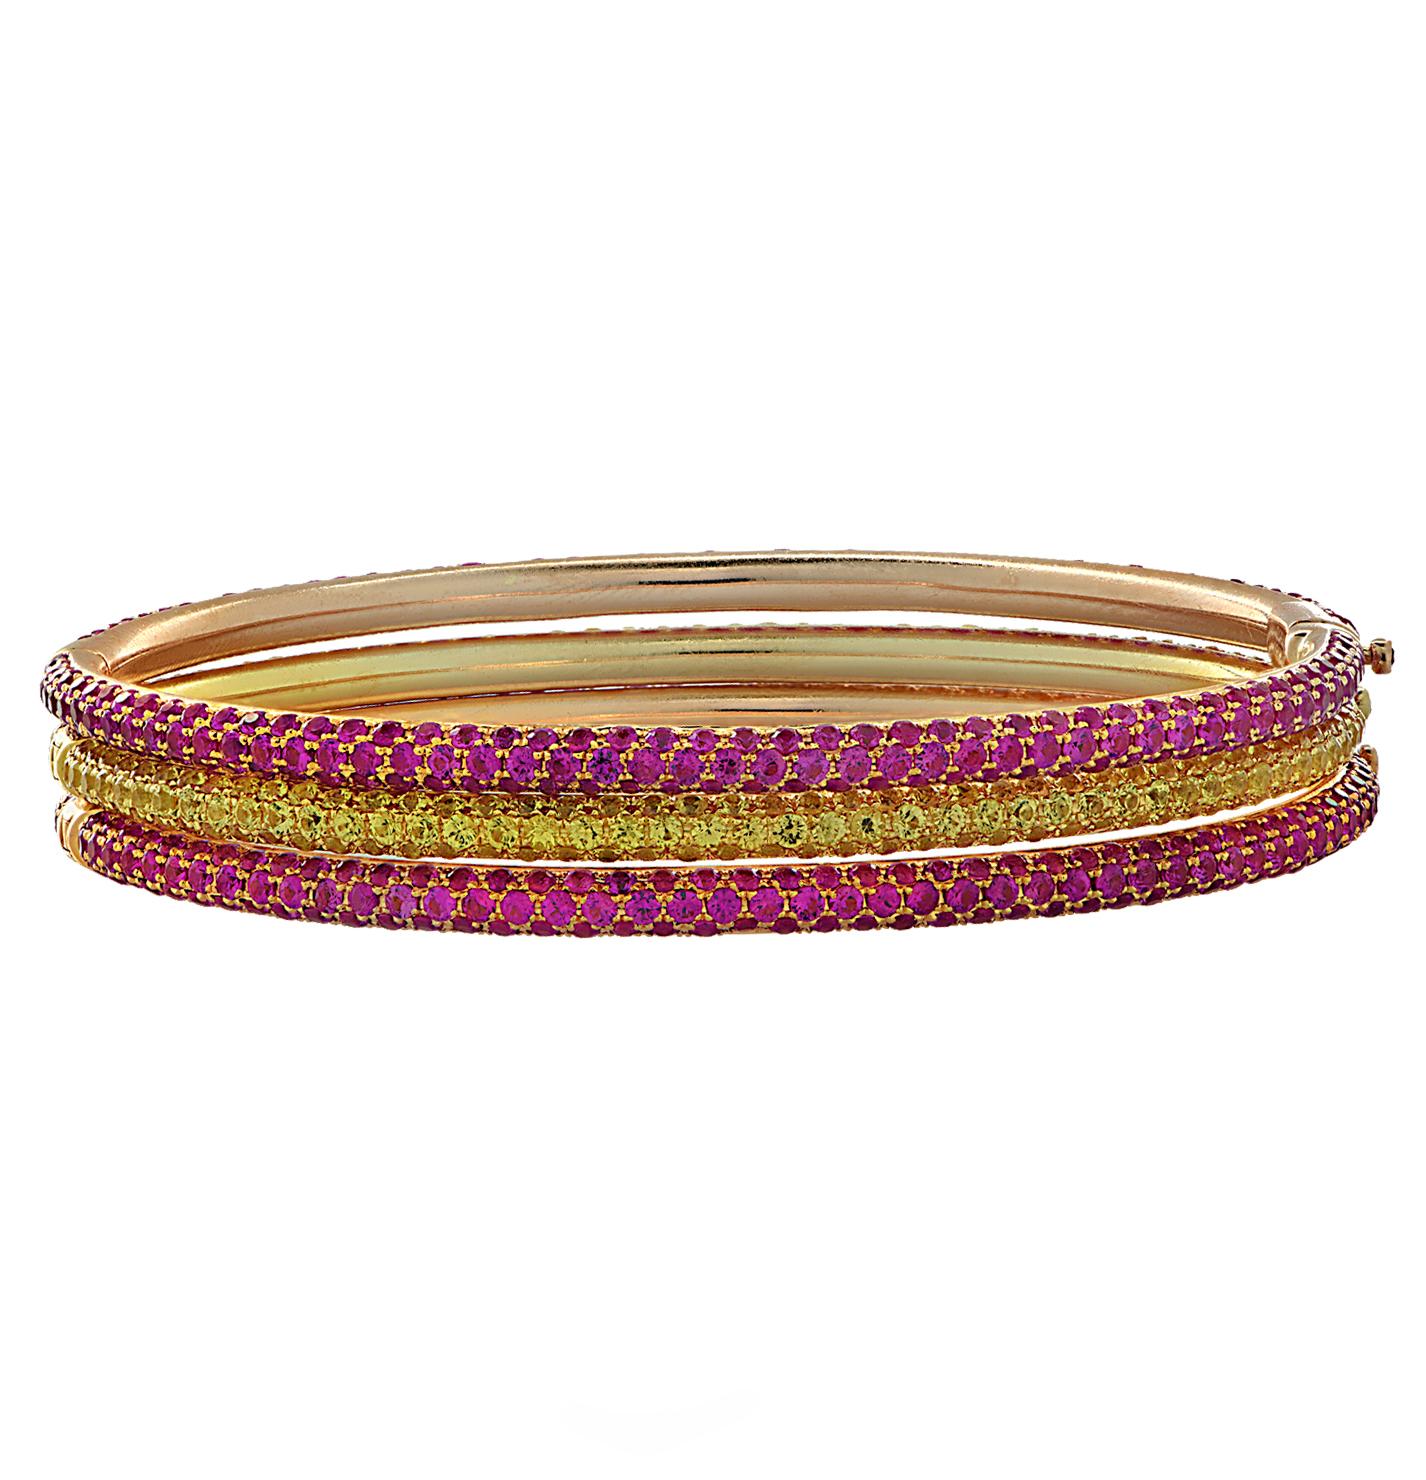 Stunning bangle bracelet set crafted in 18 karat yellow and rose gold, featuring Pink Sapphires weighing approximately 11.4 carats total and Yellow Sapphires weighing approximately 6.2 carats total. This set comprises of two rose gold bangles